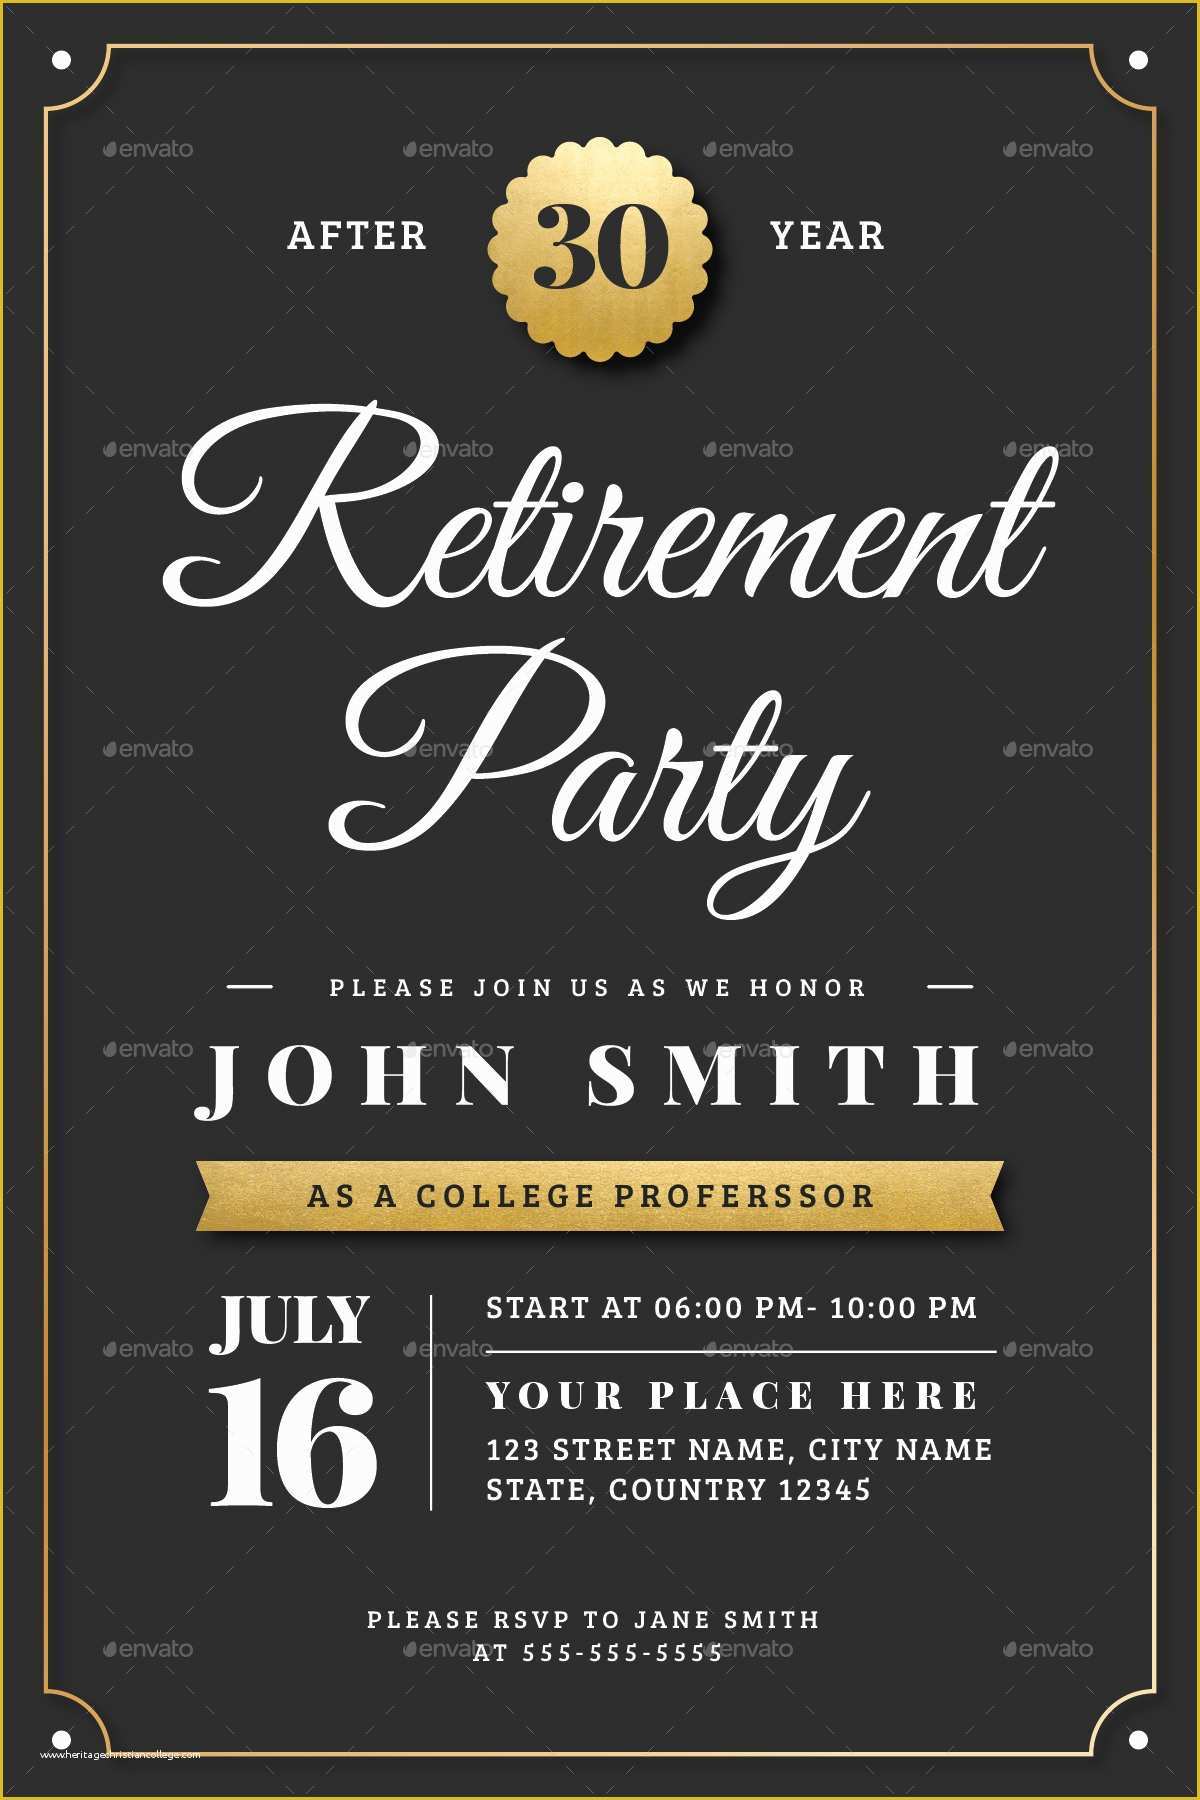 Retirement Party Announcement Template Free Of Gold Retirement Invitation Flyer Templates by Vector